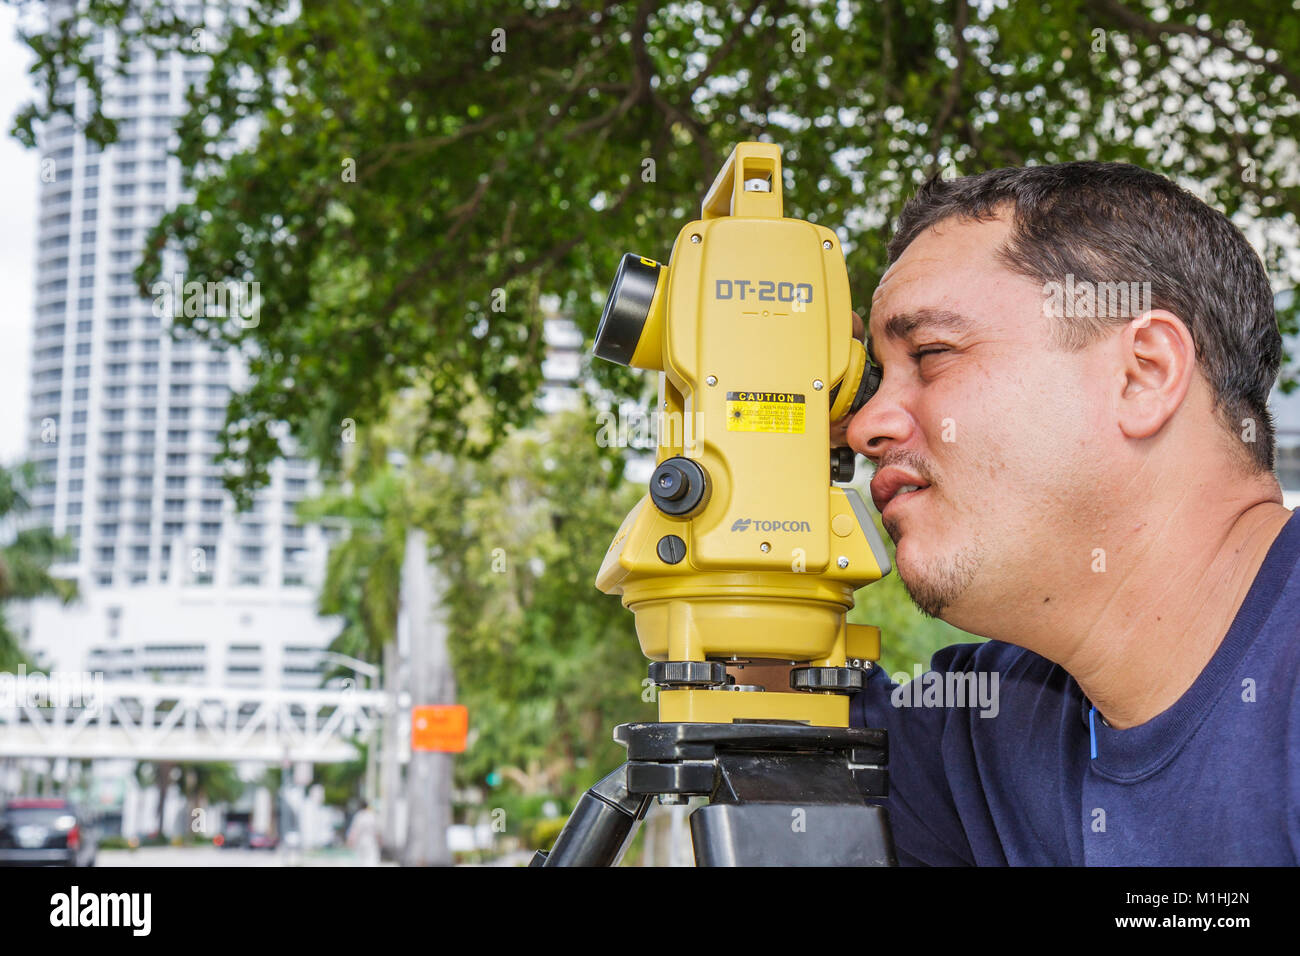 Miami Florida,theodolite,measures angles,Hispanic man men male,survey,interview,interviews,interviewing,Topcon,working,work,employee worker workers st Stock Photo